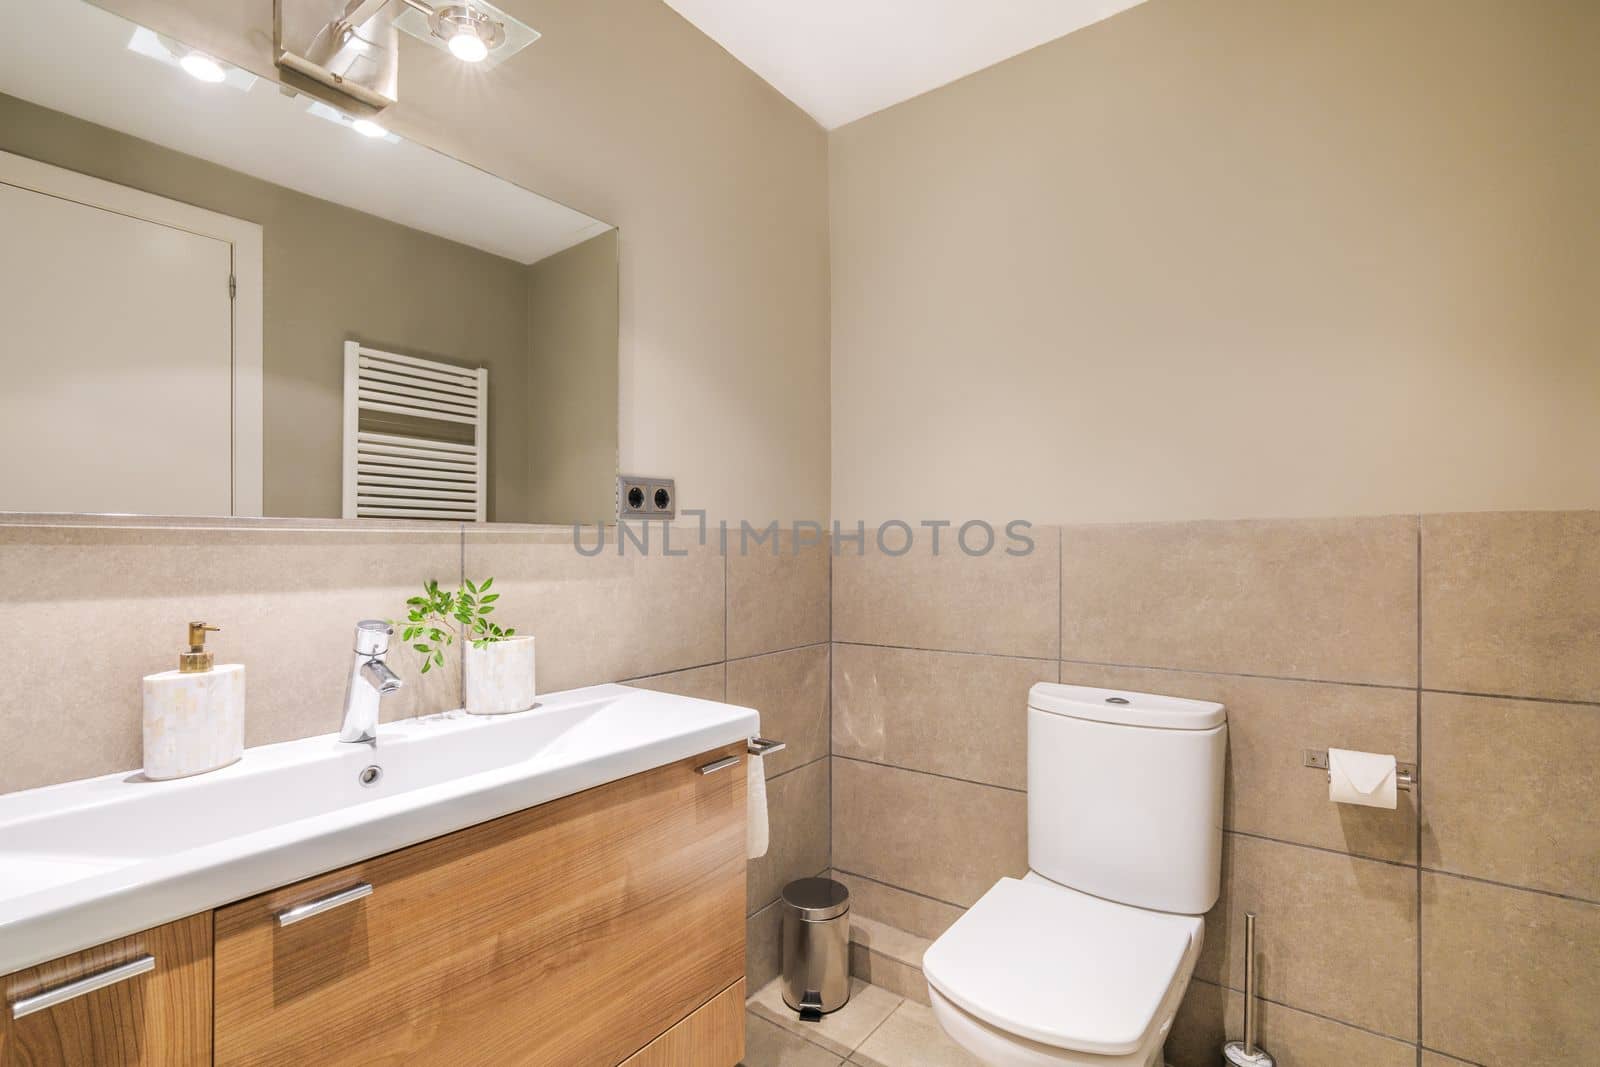 This elegant bathroom features a modern design with beige tiles, a spacious room, sleek sink, mirror and toilet. The neutral colors and clean lines create a serene and inviting space. by apavlin